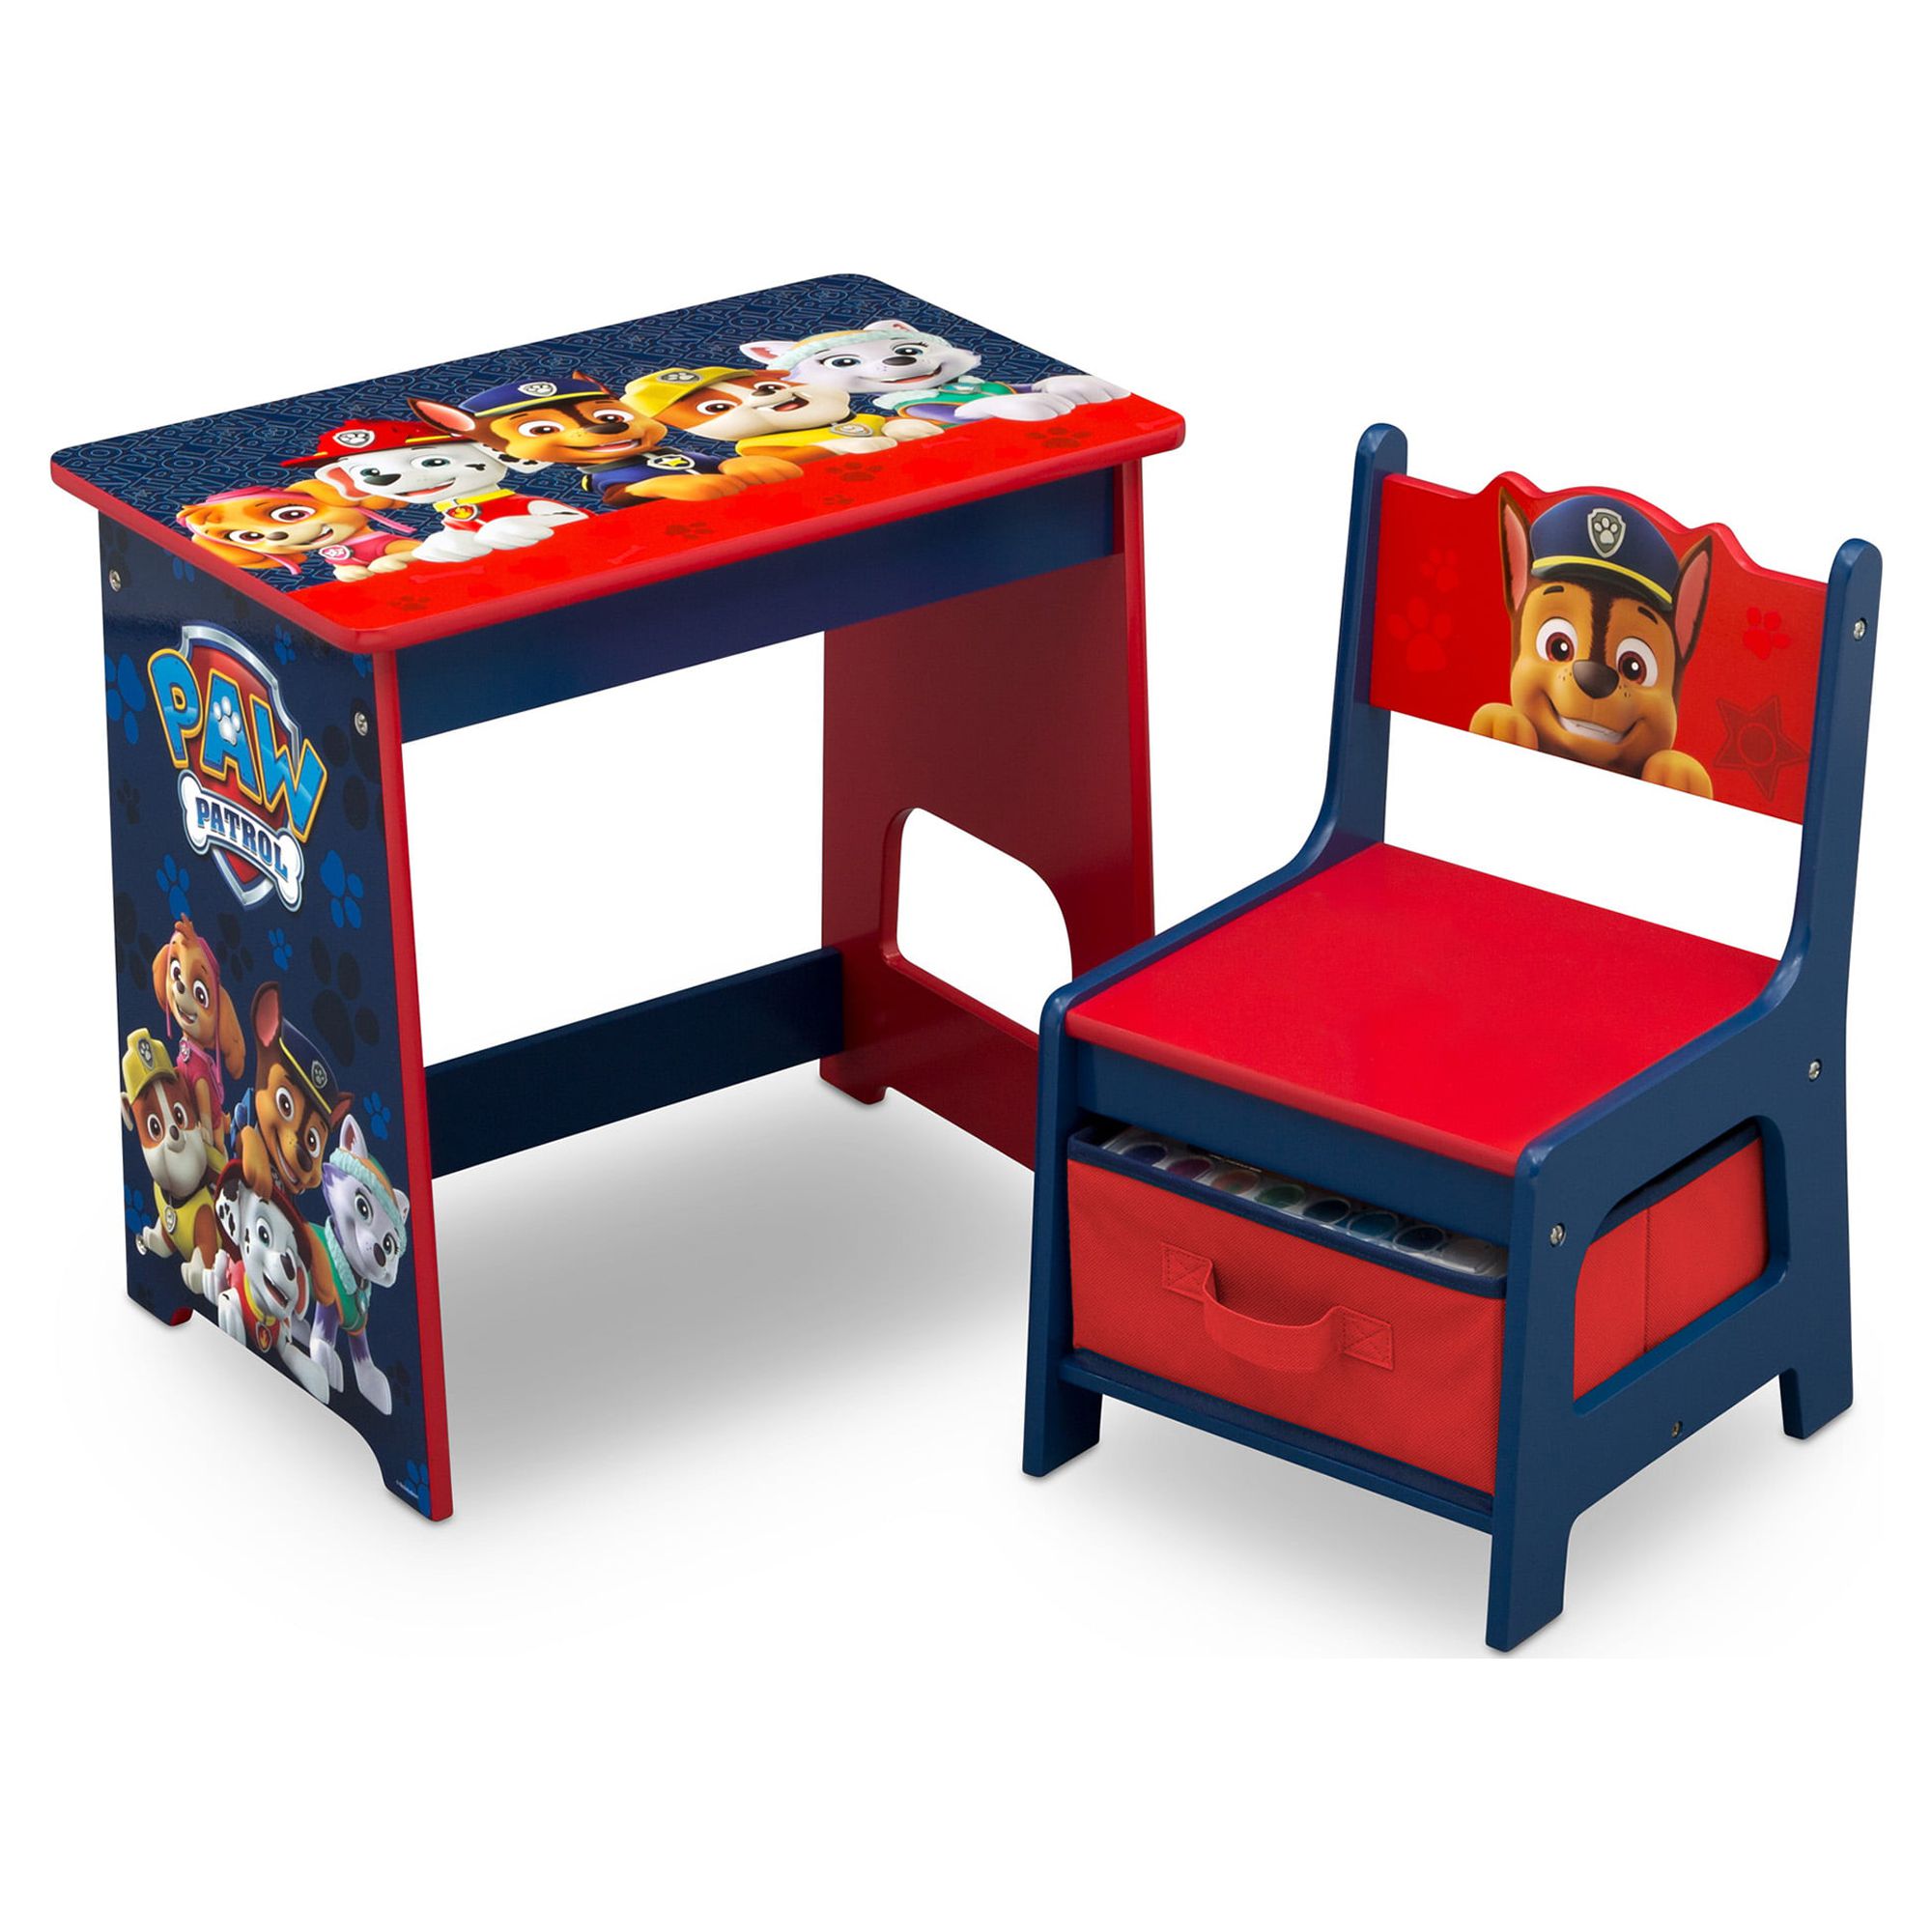 Nick Jr. PAW Patrol 4-Piece Room-in-a-Box Bedroom Set by Delta Children - Includes Sleep & Play Toddler Bed, 6 Bin Design & Store Toy Organizer and Desk with Chair - image 5 of 14